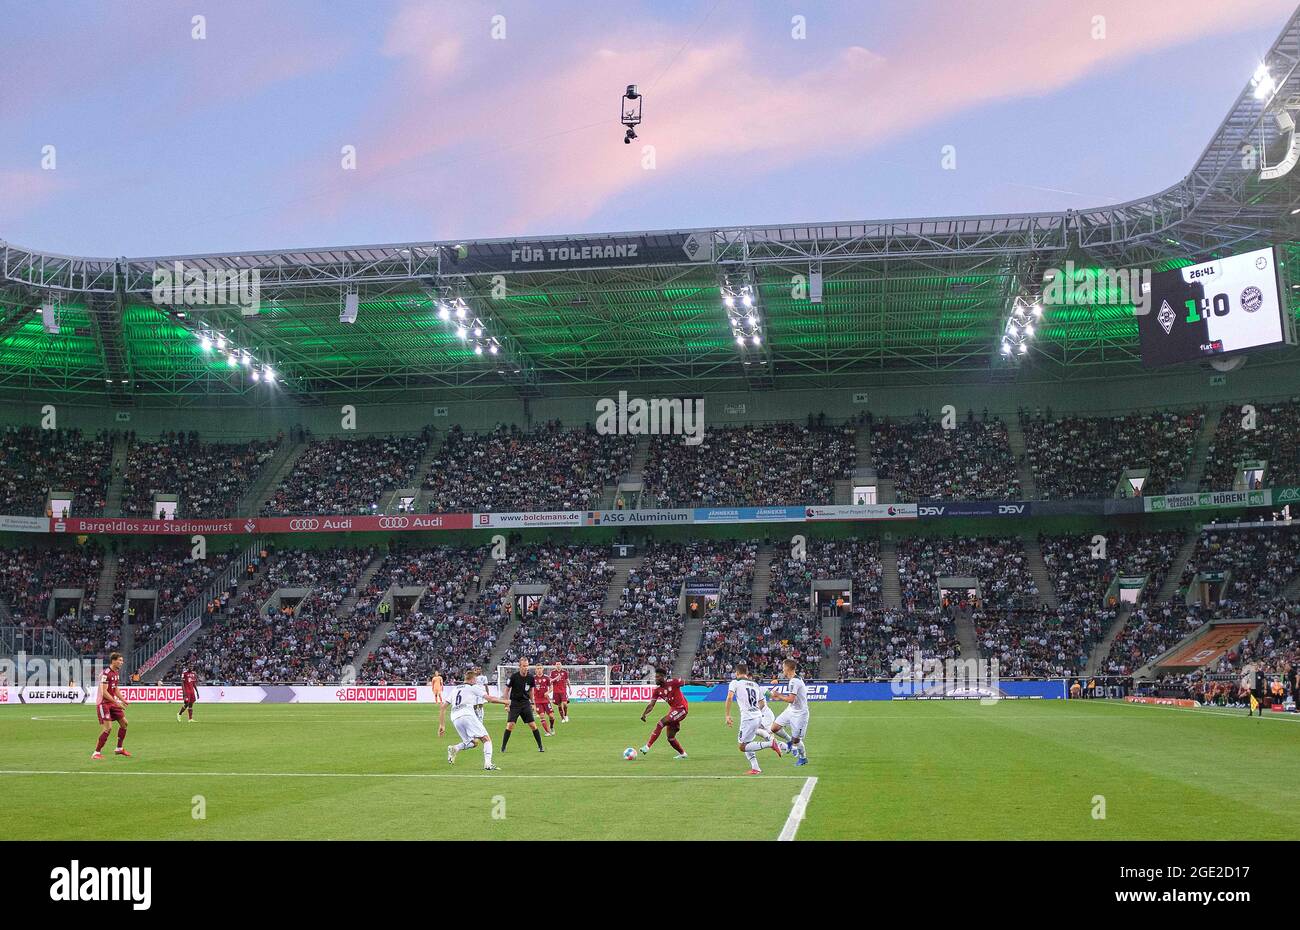 Game scene in Borussia-Park, action, in front of evening sky, soccer 1st Bundesliga, 1st matchday, Borussia Monchengladbach (MG) - FC Bayern Munich (M) 1: 1, on August 13th, 2021 in Borussia Monchengladbach/Germany. #DFL regulations prohibit any use of photographs as image sequences and/or quasi-video # Â Stock Photo